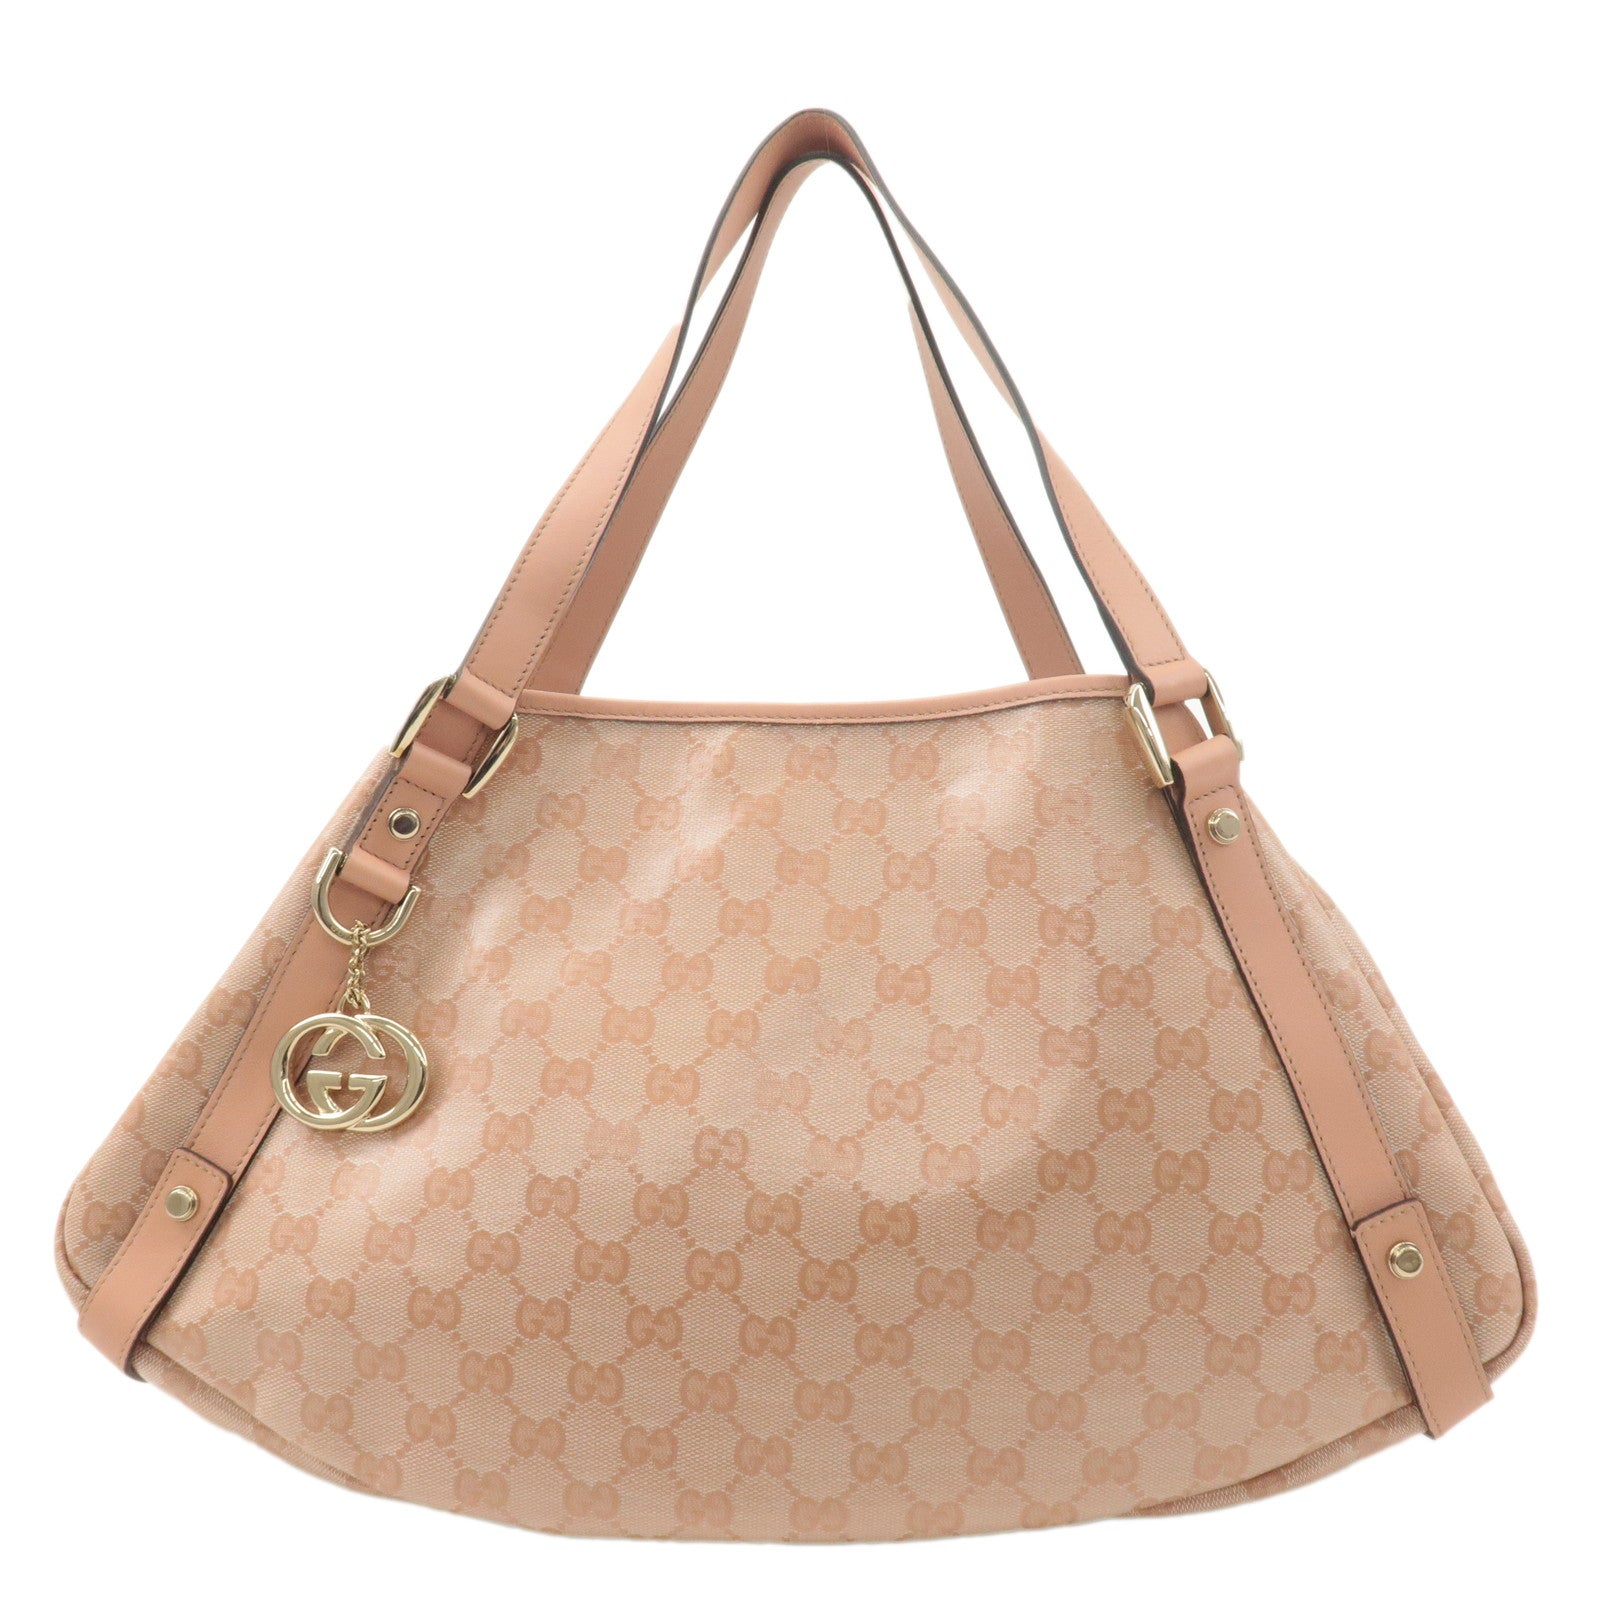 GUCCI-Abbey-GG-Crystal-Leather-Tote-Hand-Bag-Pink-130736